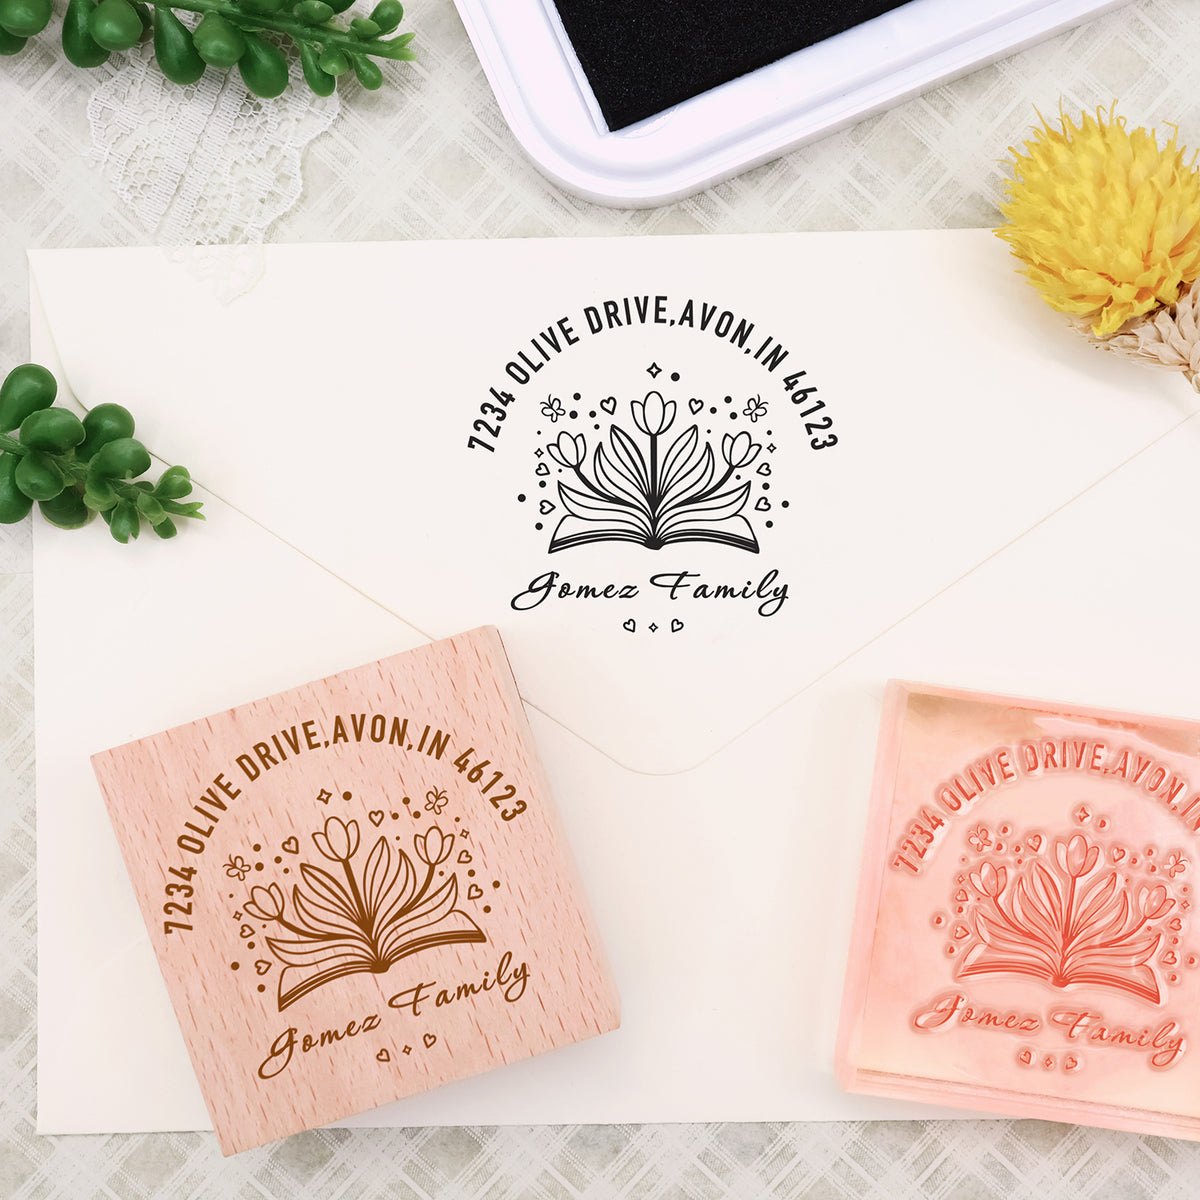 Custom Library Rubber Stamp (18 Designs) - Book Stamps